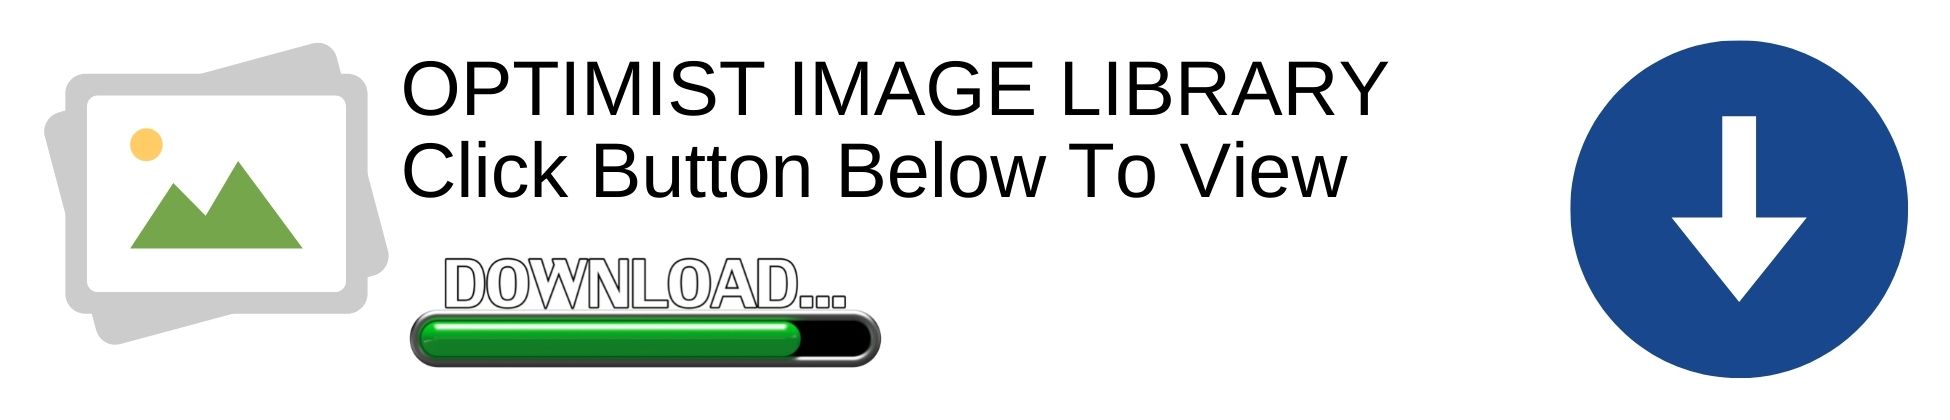 image for optimist video library